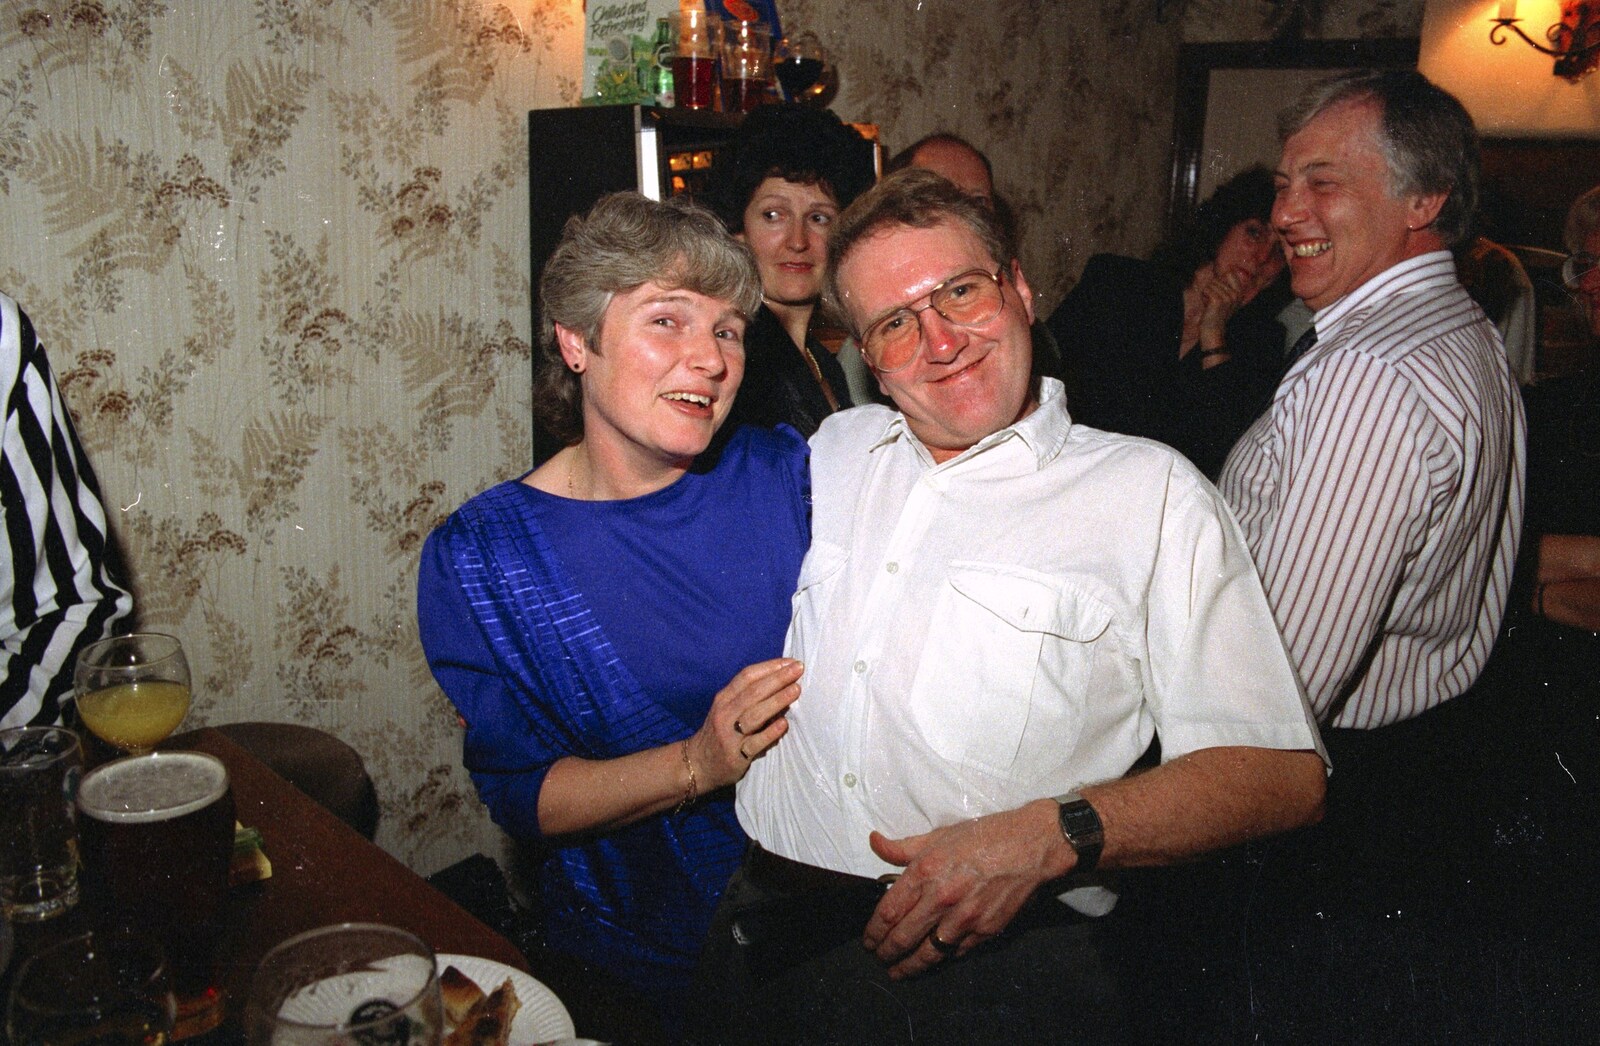 Spammy and John Willy from New Year's Eve at the Swan Inn, Brome, Suffolk - 31st December 1991